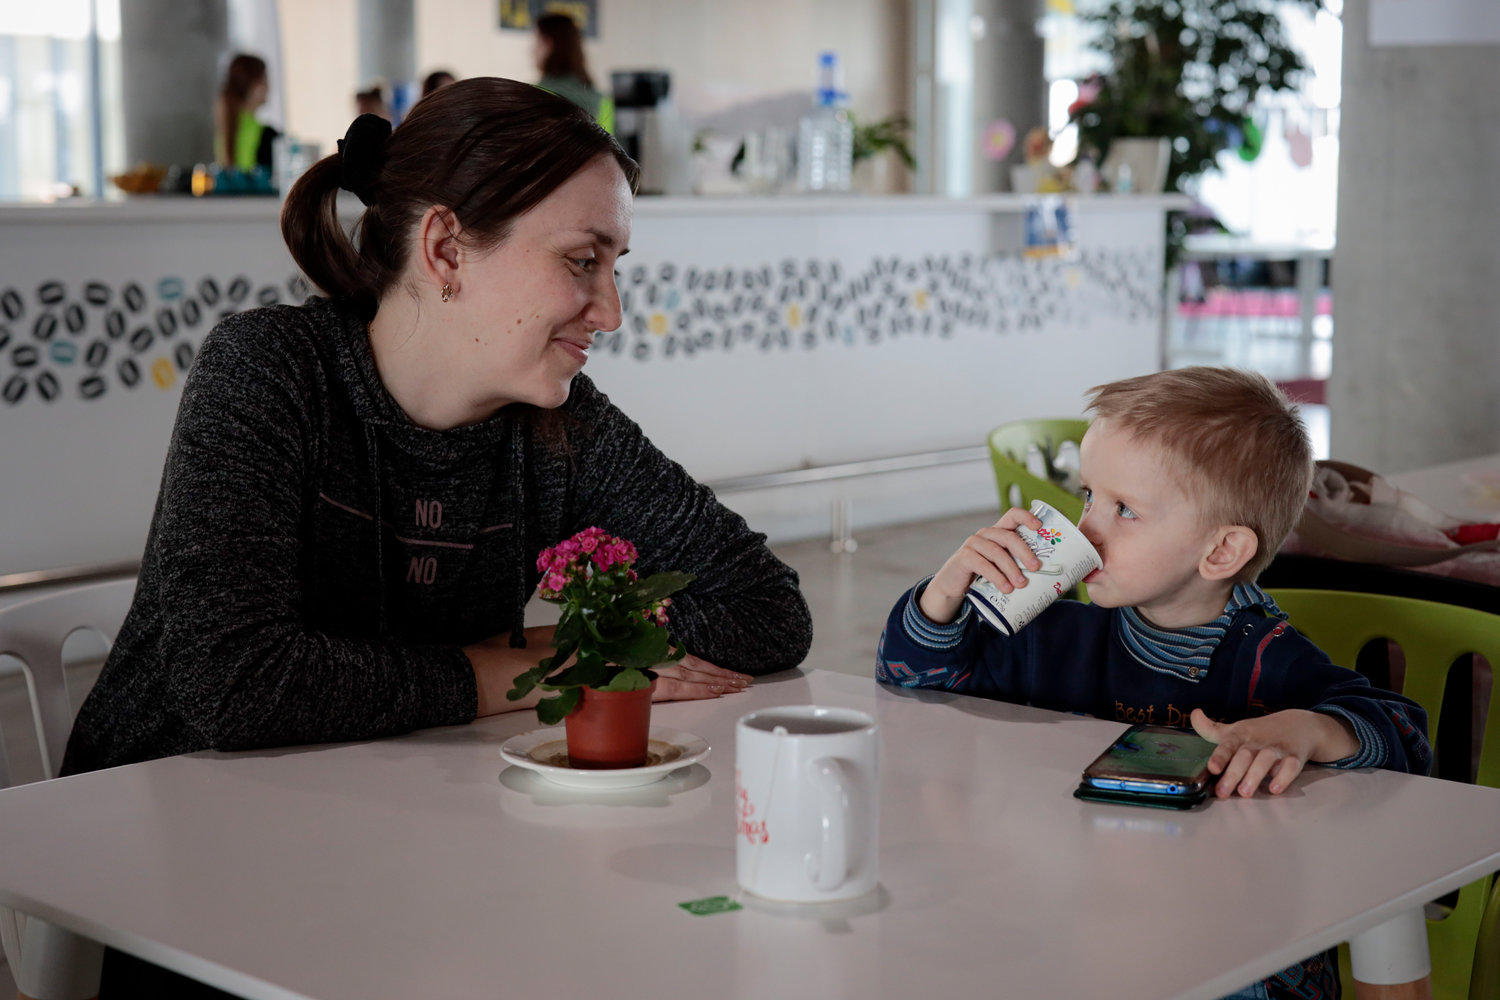 SAFE IN ROMANIA — Elena Litvinova, 33, an accountant from Mykolaiv, Ukraine, smiles at her 3-year-old son, Artem, after an interview with The Associated Press at a refugee center in Brasov, Romania, Wednesday.